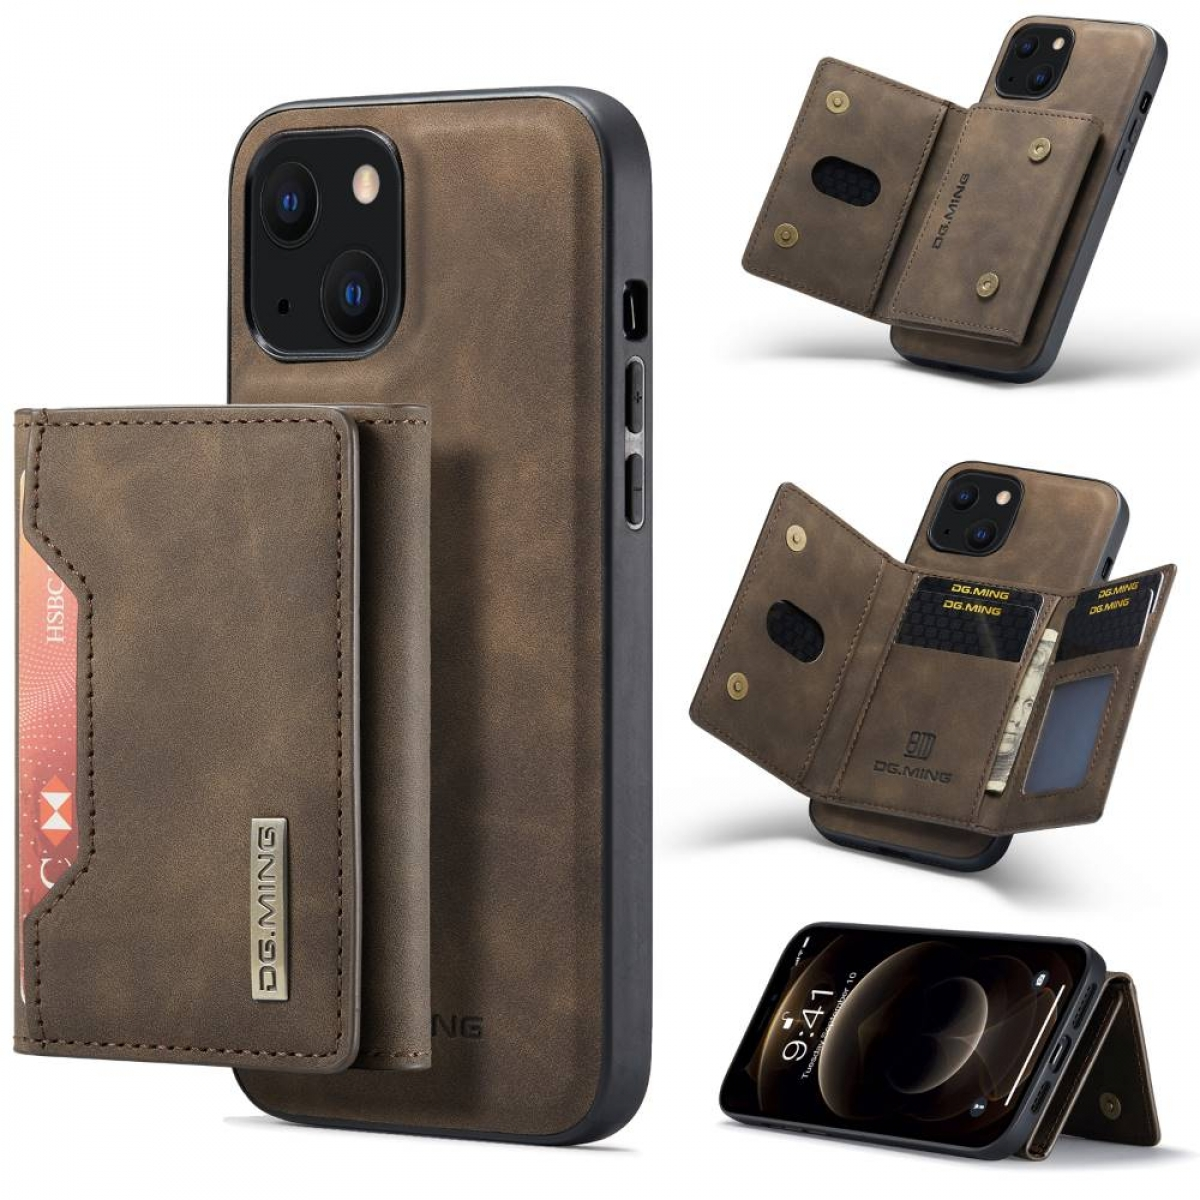 DG MING M2 Backcover, iPhone Apple, Coffee 2in1, 13